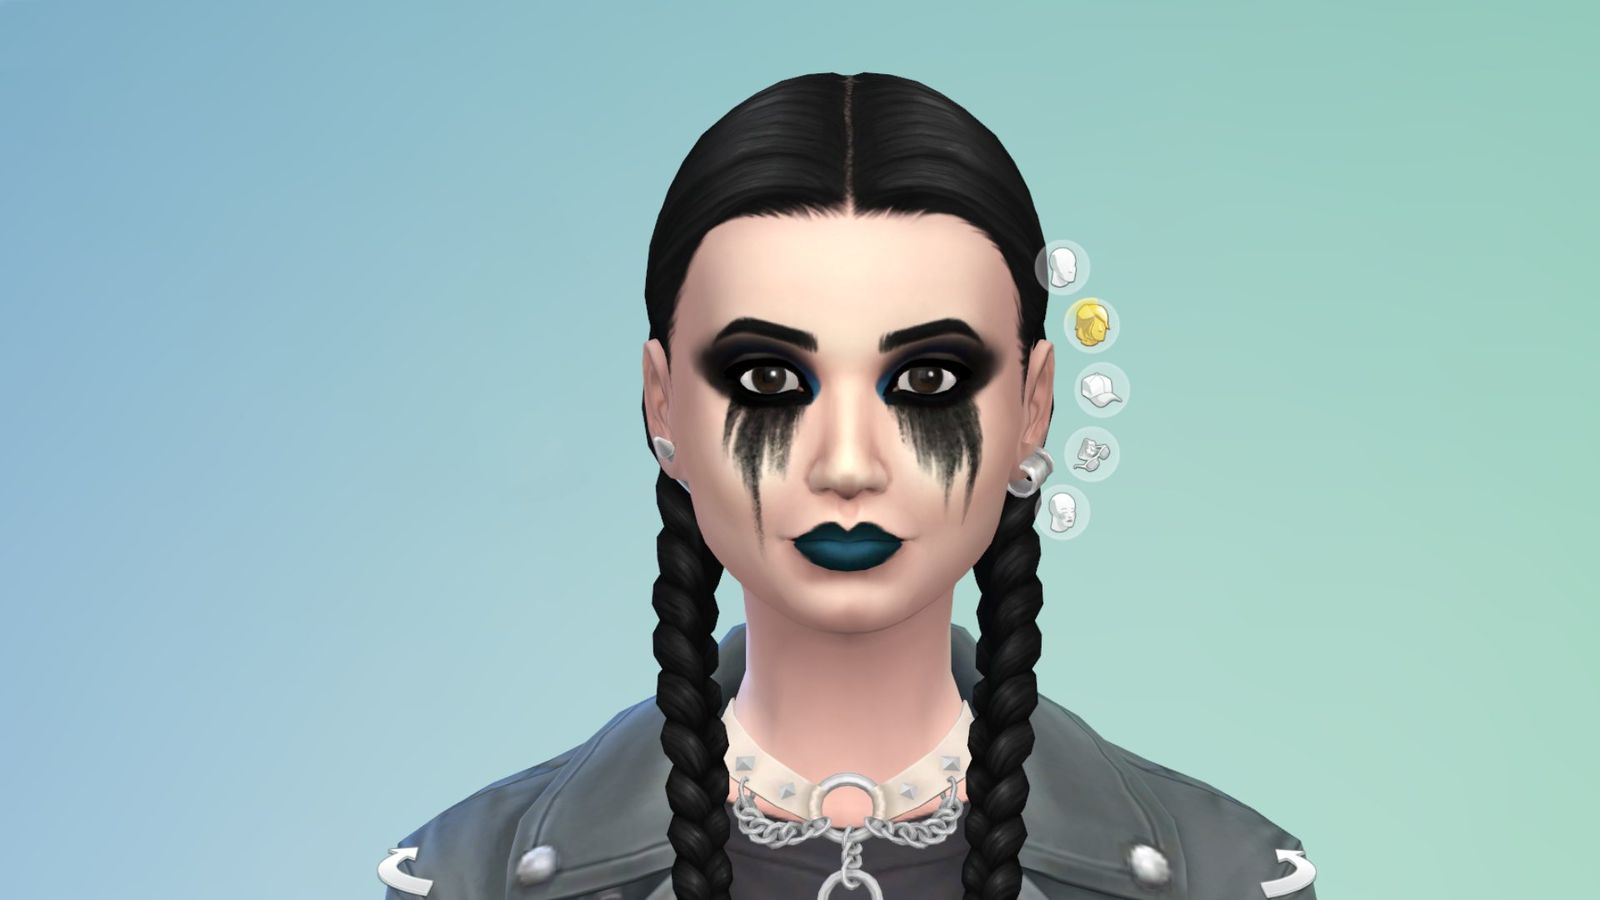 Ebony Way, a Sims 4 character that's designed with the Sims 4 Goth Galore pack update